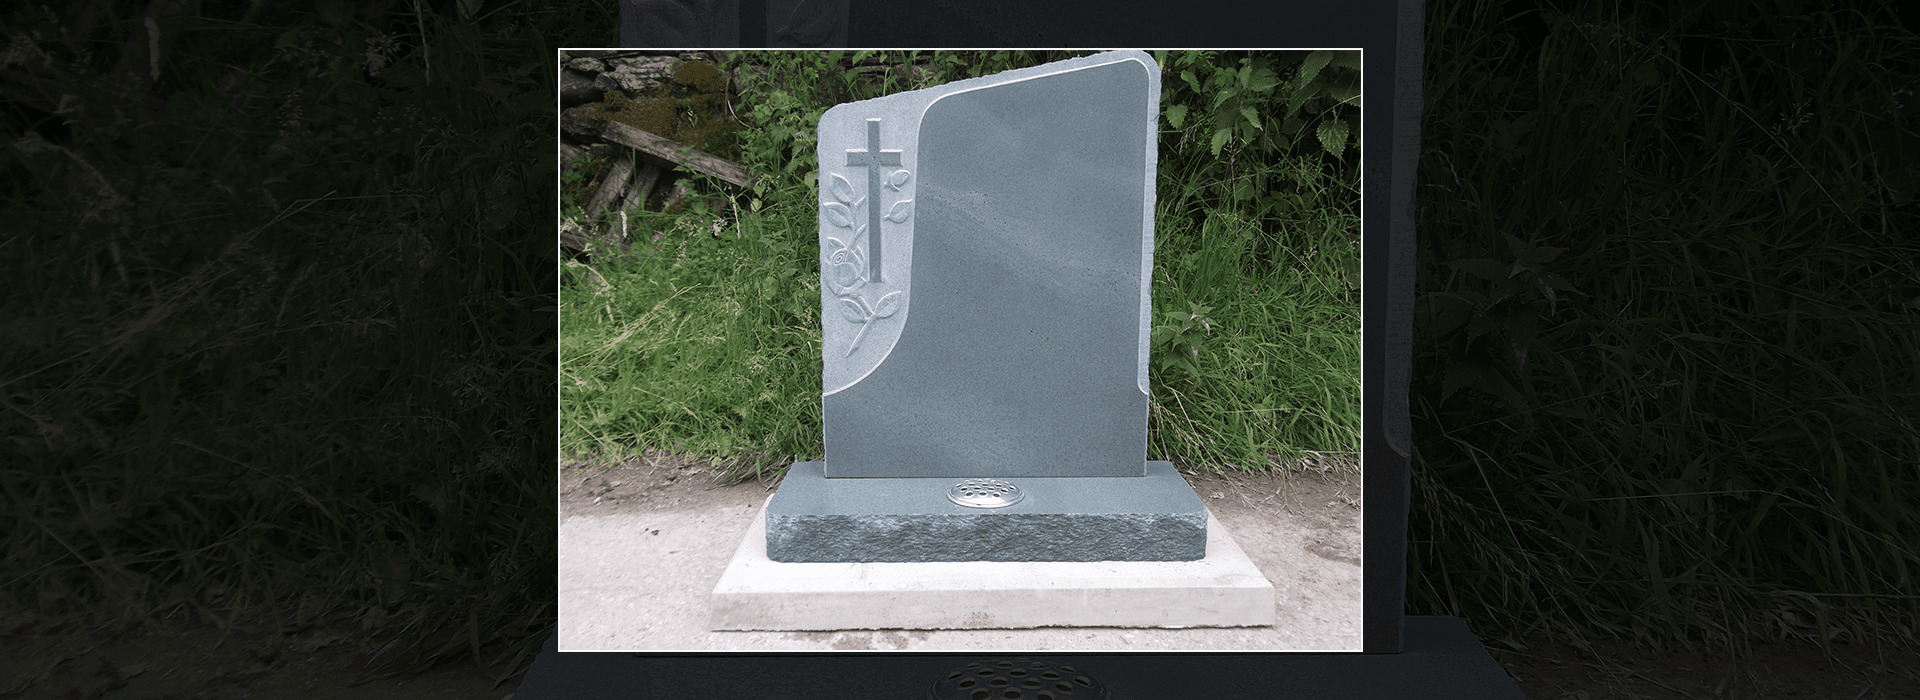 Lakeland green headstone with embossed cross and roses